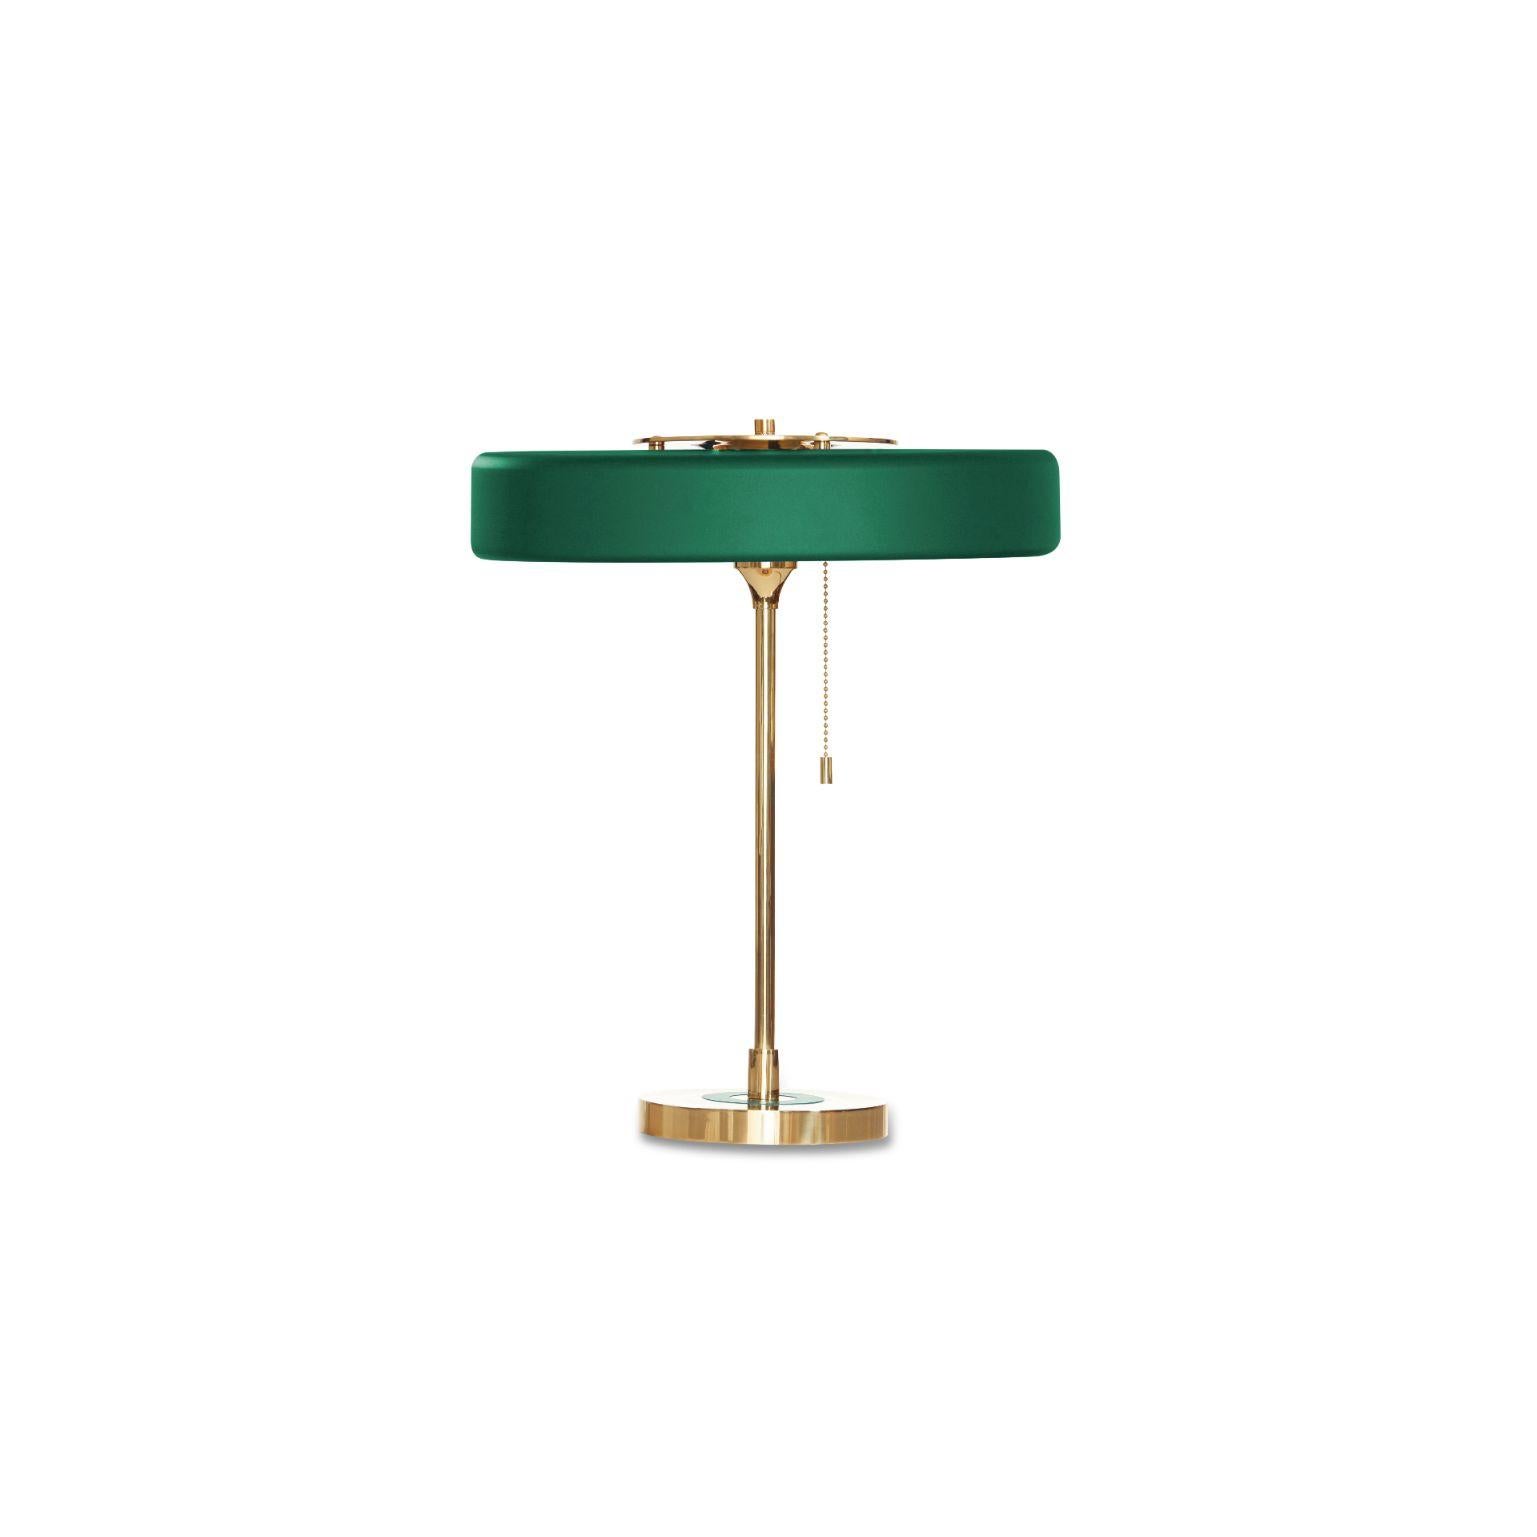 Revolve table lamp - Polished brass - Green by Bert Frank
Dimensions: 42 x 35 x 15 cm
Materials: Brass, steel

Also Available in brushed brass

When Adam Yeats and Robbie Llewellyn founded Bert Frank in 2013 it was a meeting of minds and the start